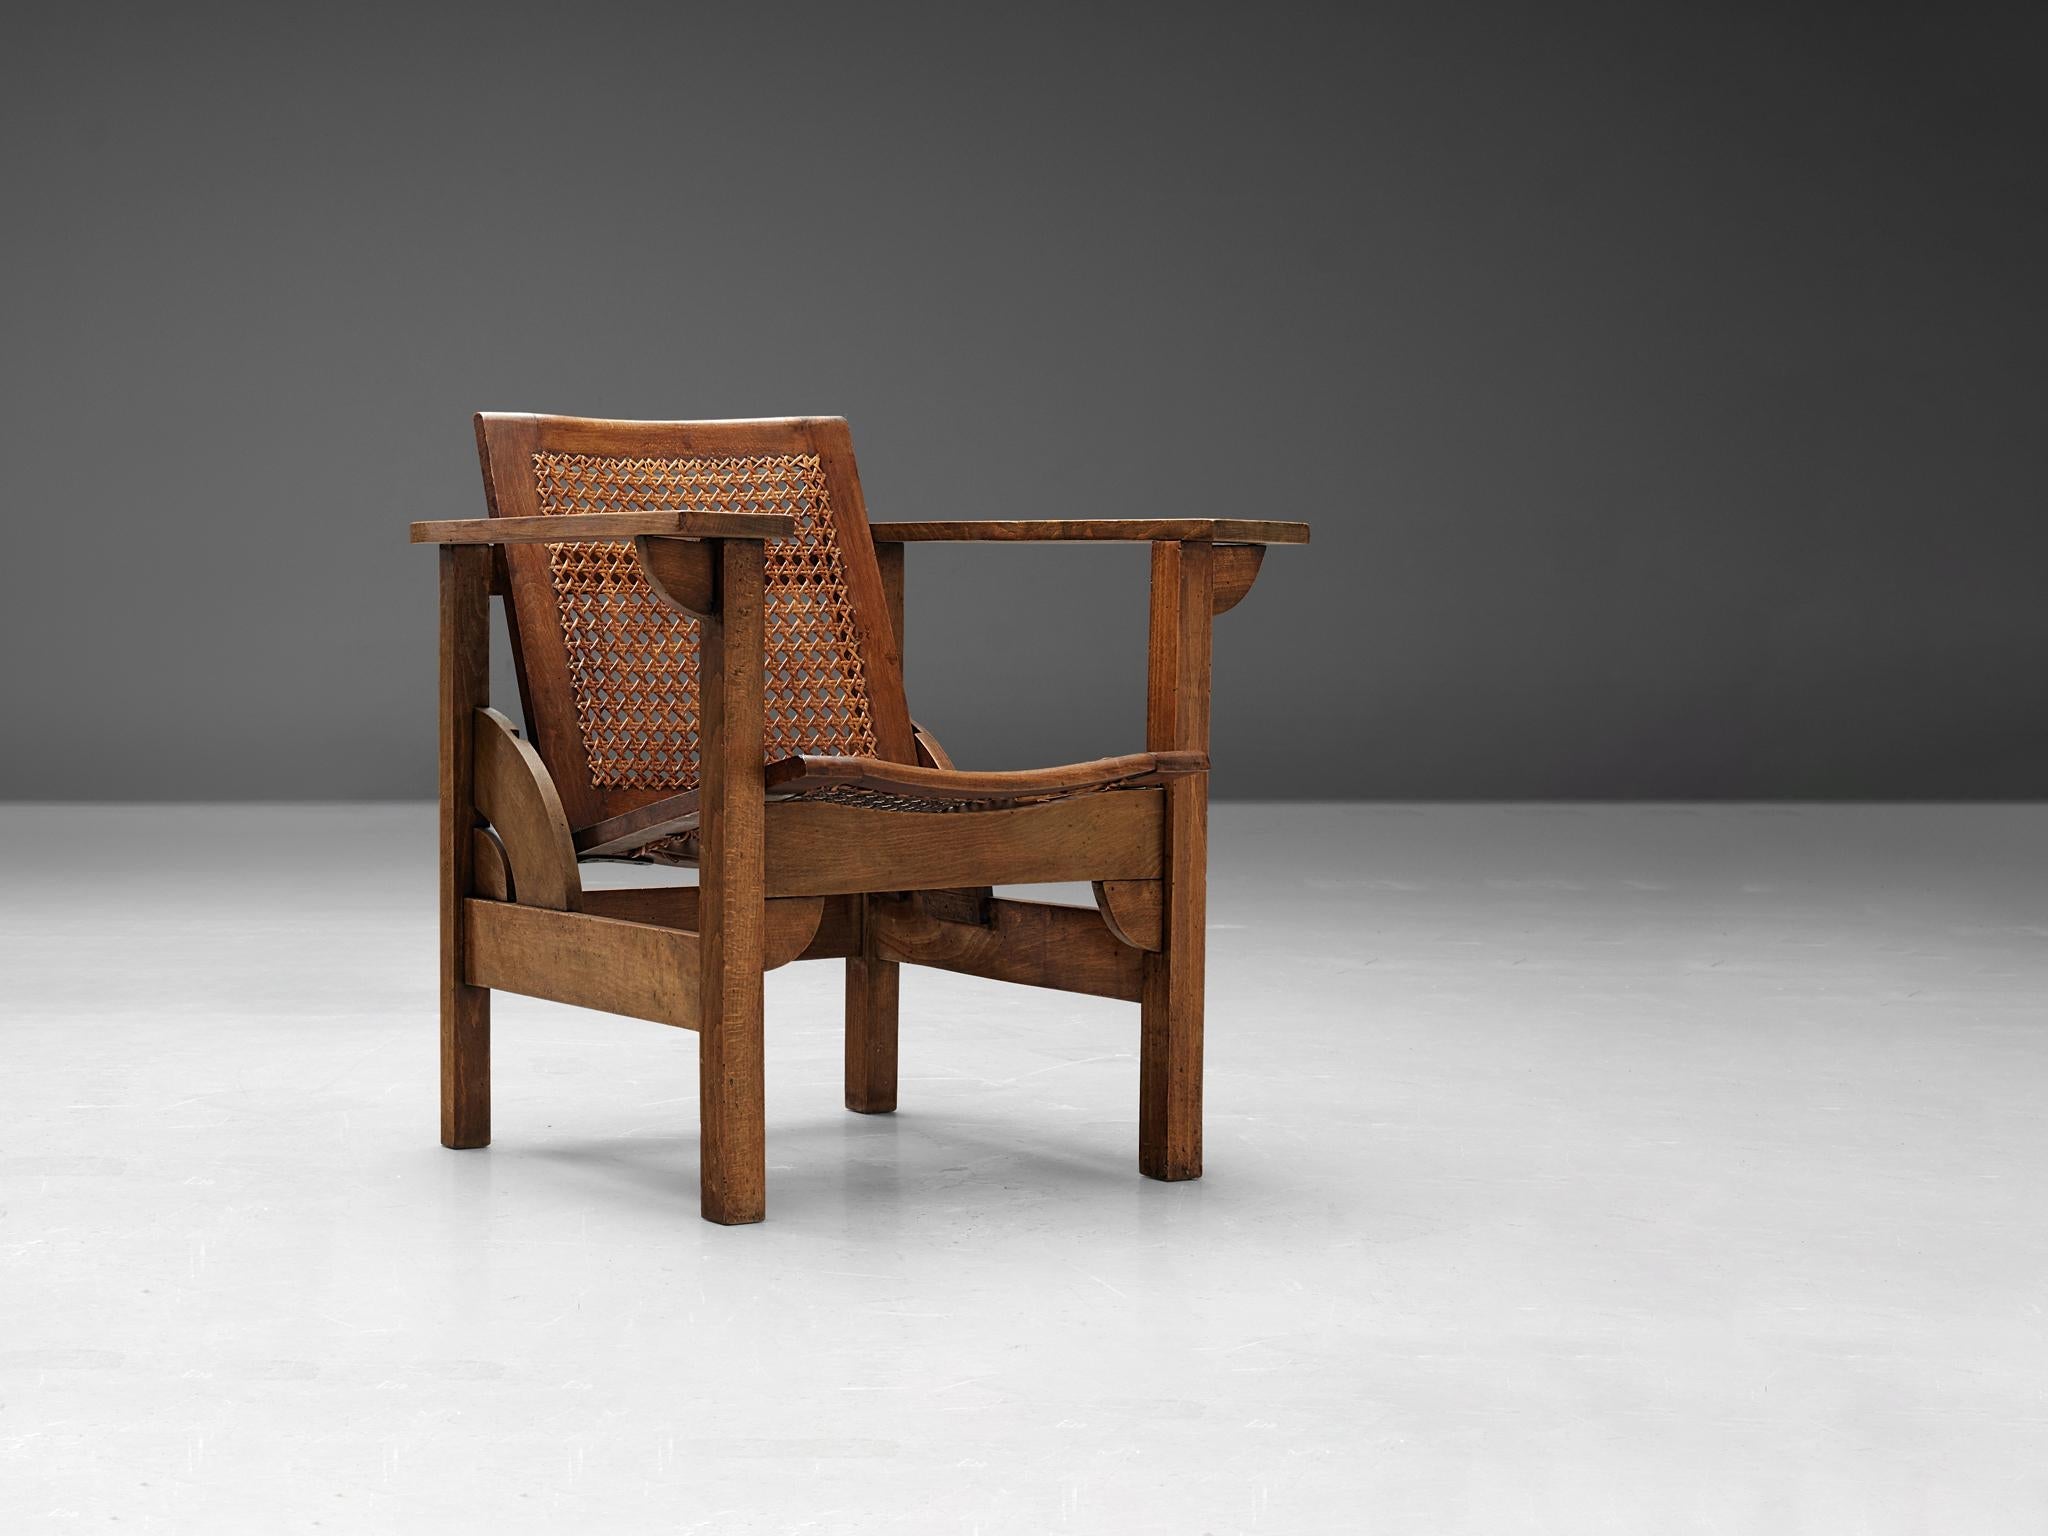 Pierre Dariel 'Hendaye' Armchair in Wood and Cane